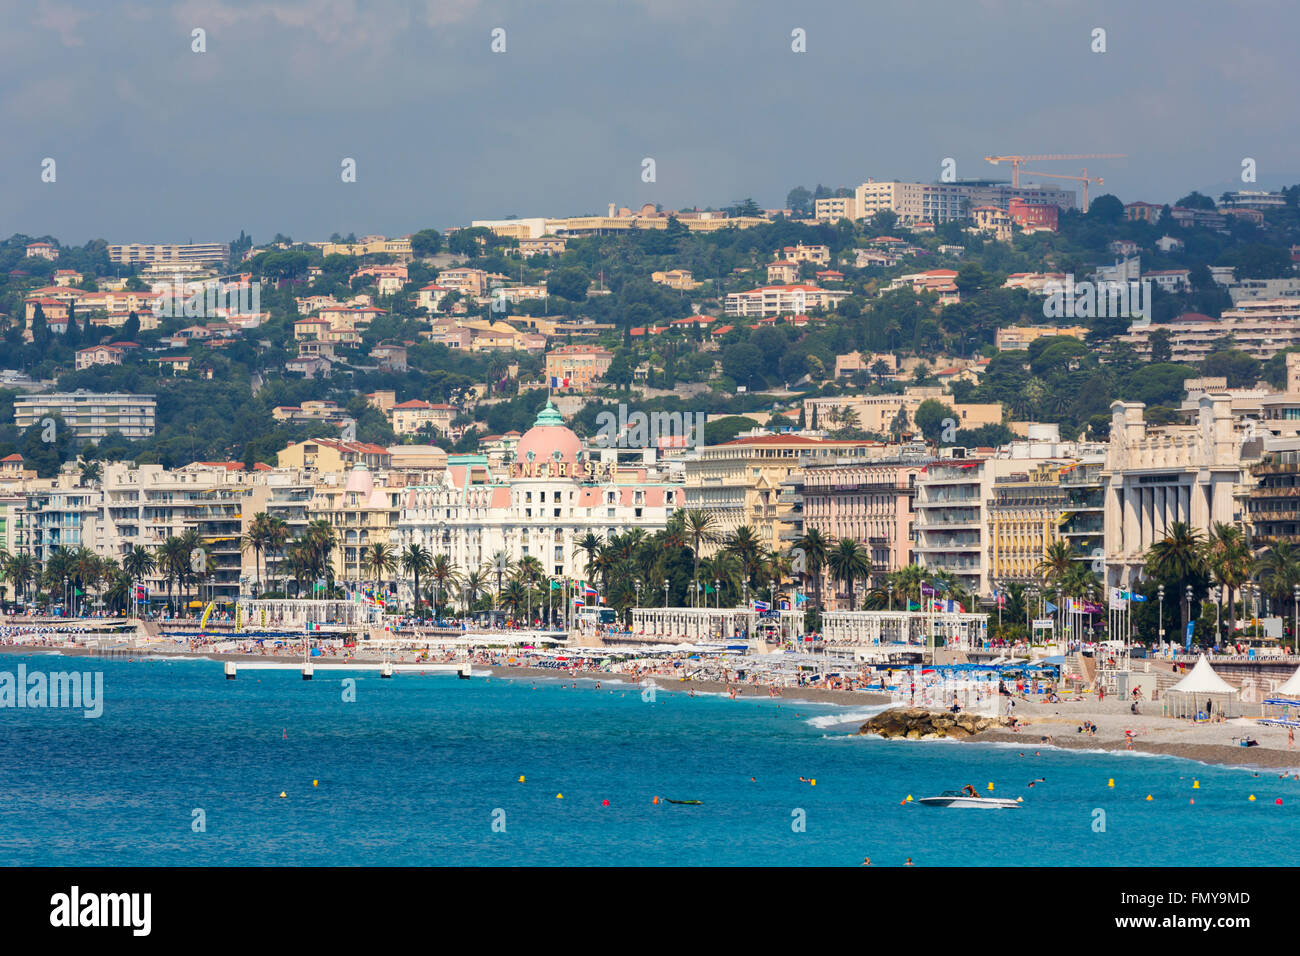 Beach Nice Hotel Negresco In High Resolution Stock Photography And Images Alamy